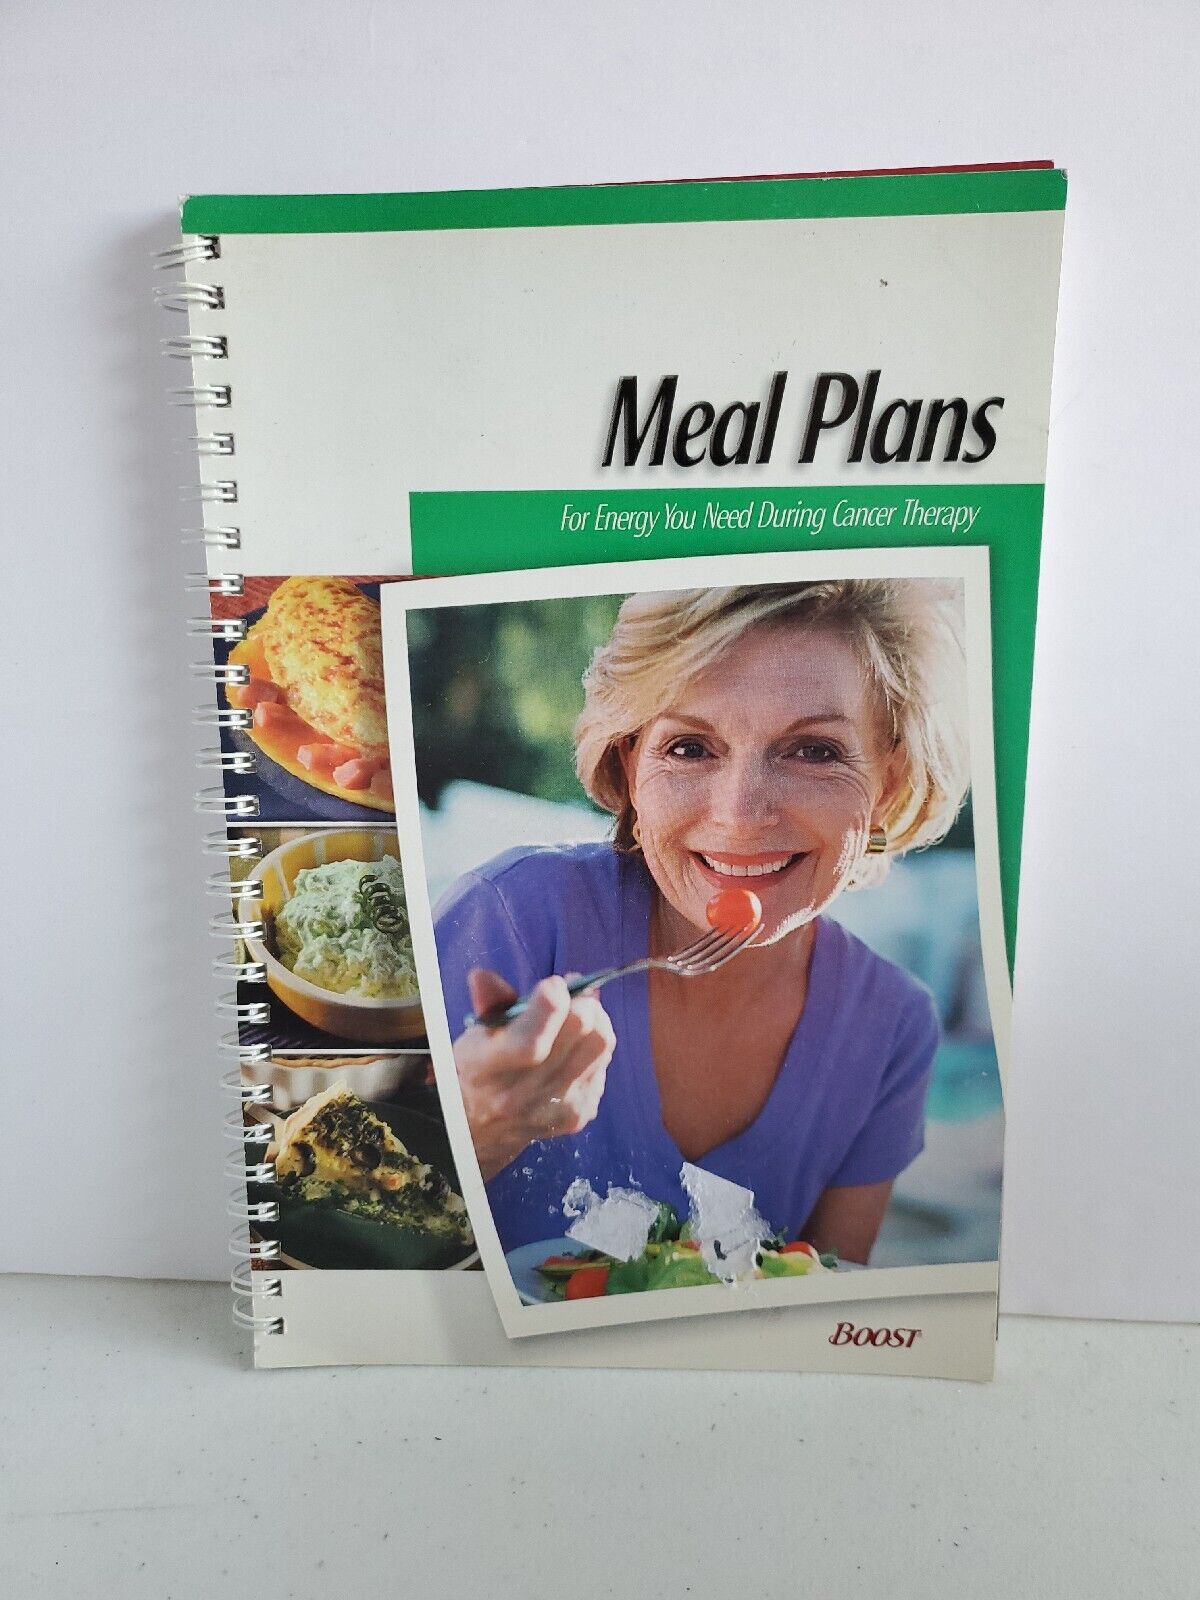 Meal Plans For Energy You Need During Cancer Therapy BOOST Cookbook Recipe Book